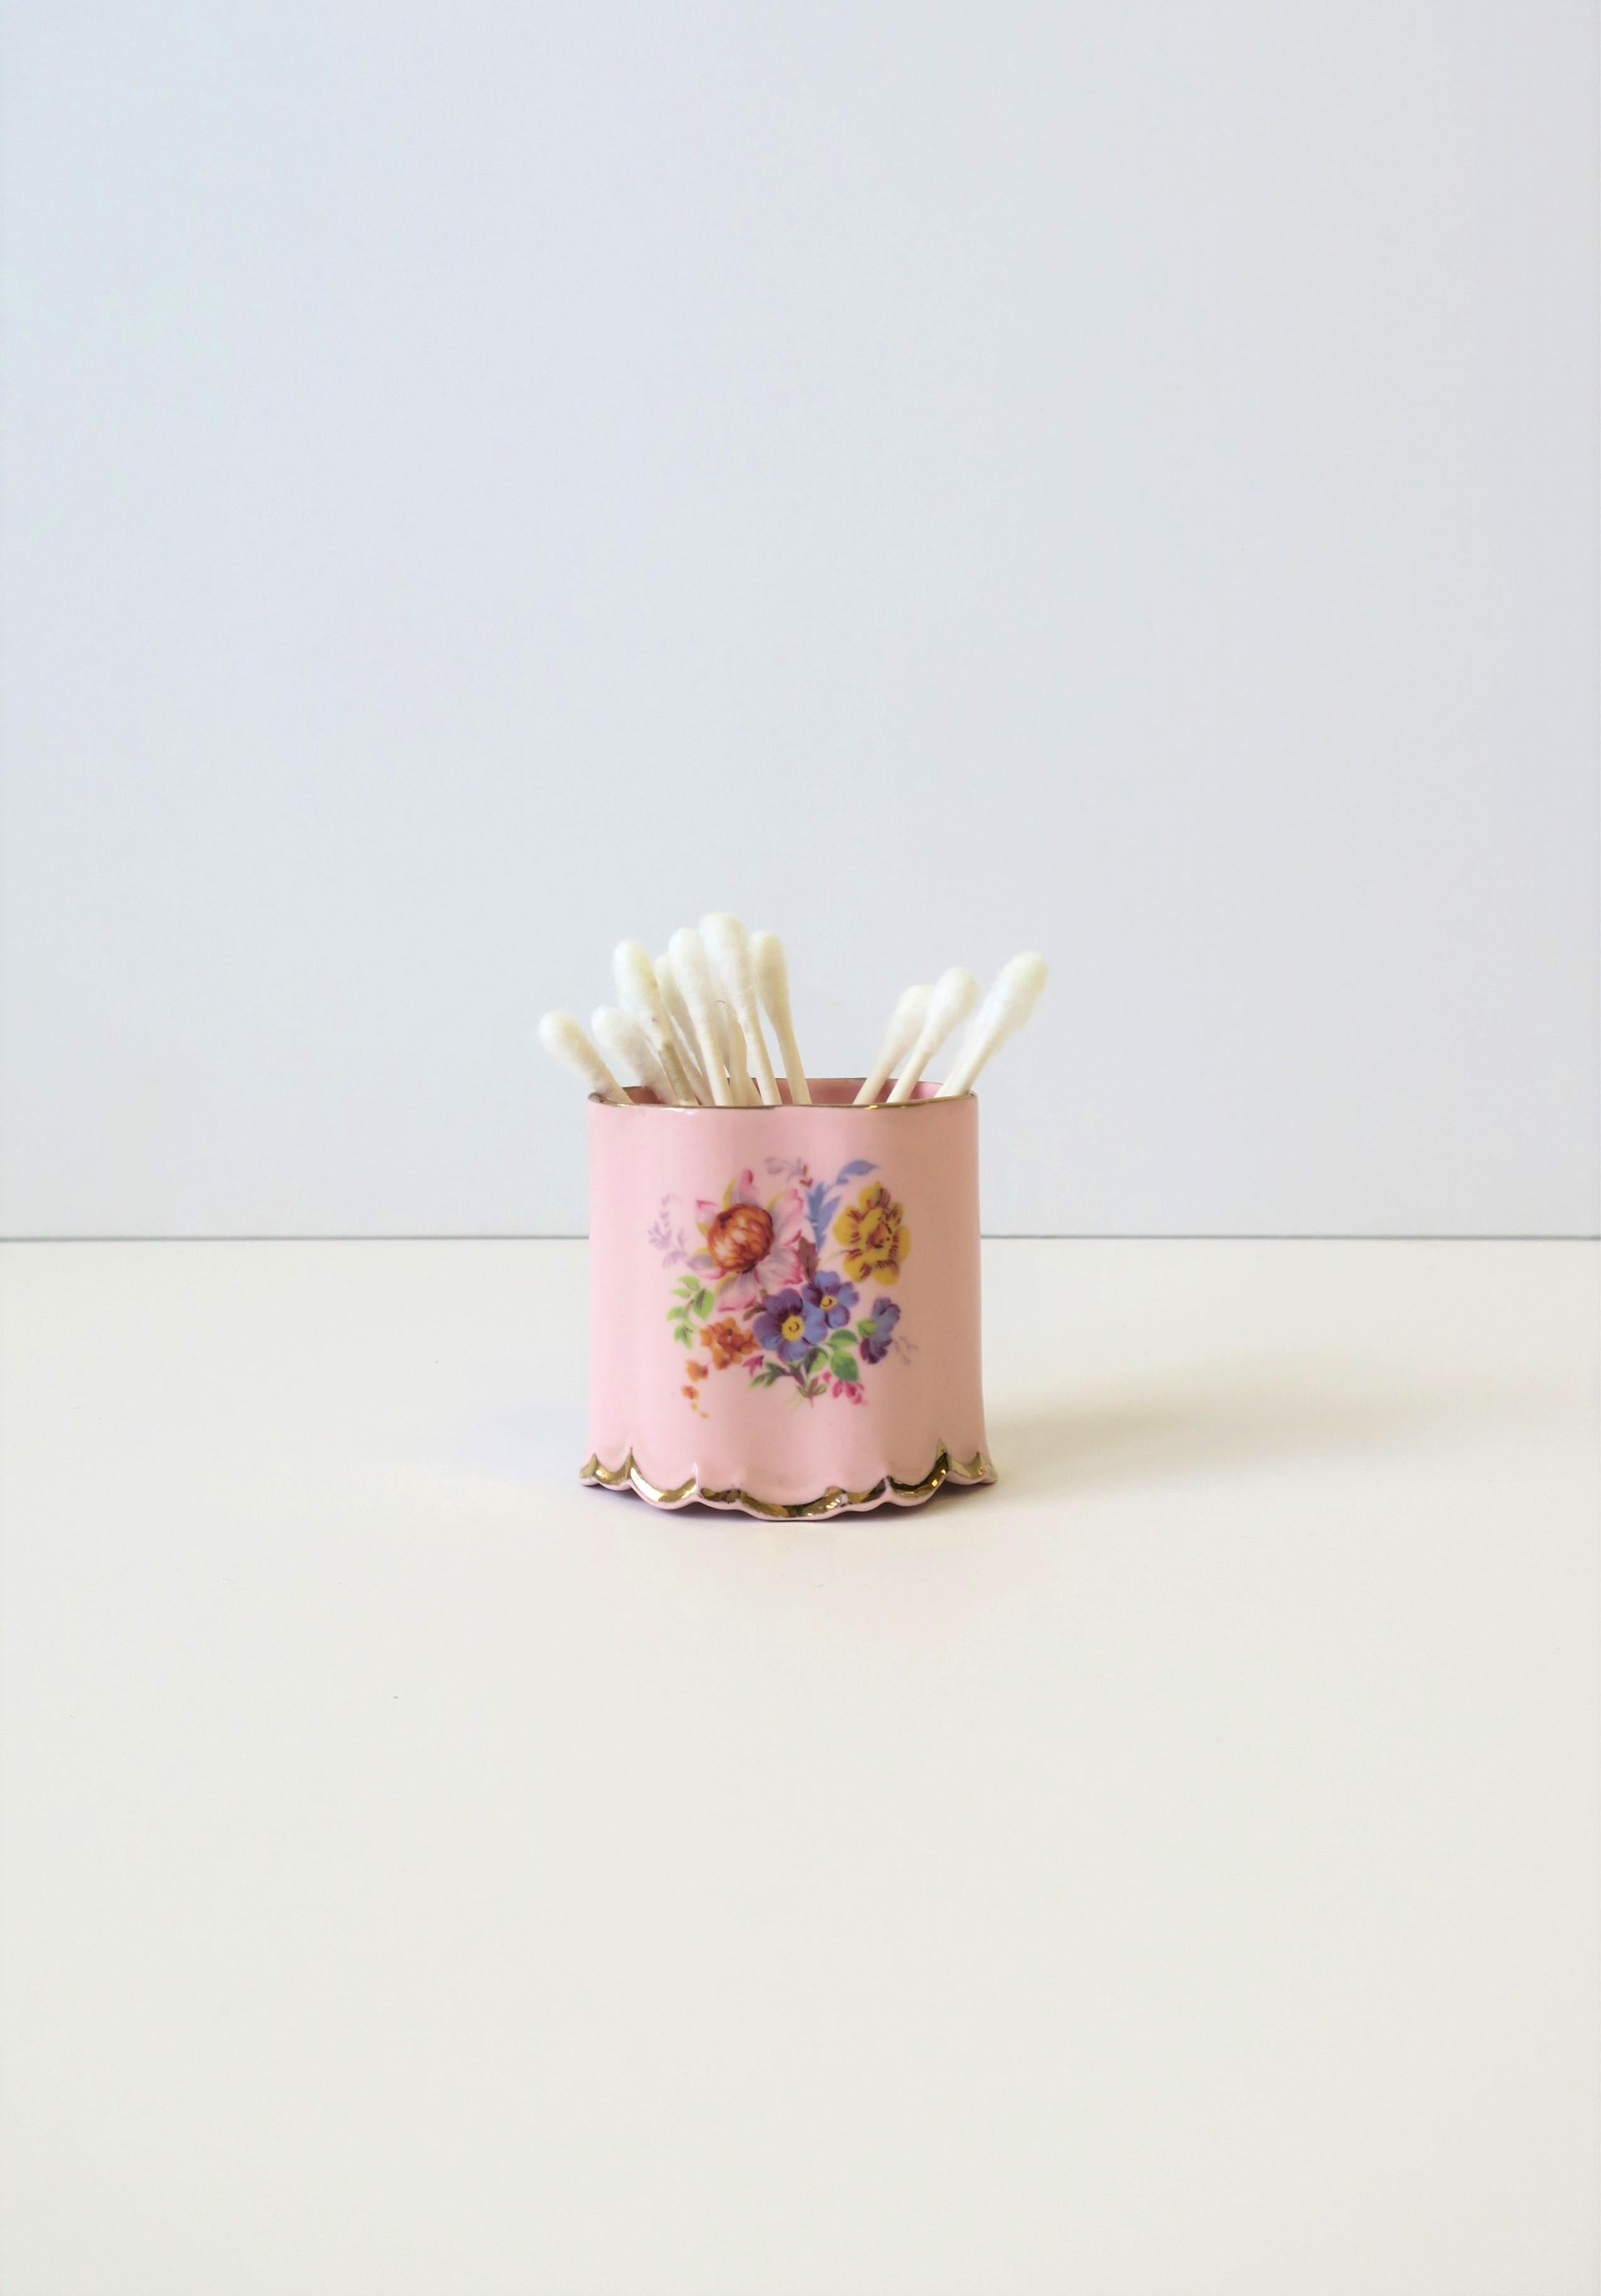 An English pink porcelain cigarette holder, in the Rococo style, by Arthur Bowker for Staffordshire, circa early-20th century, England. Piece is pink porcelain, oval, with a floral chintz design on front and back, scalloped edge, and trimmed in gold